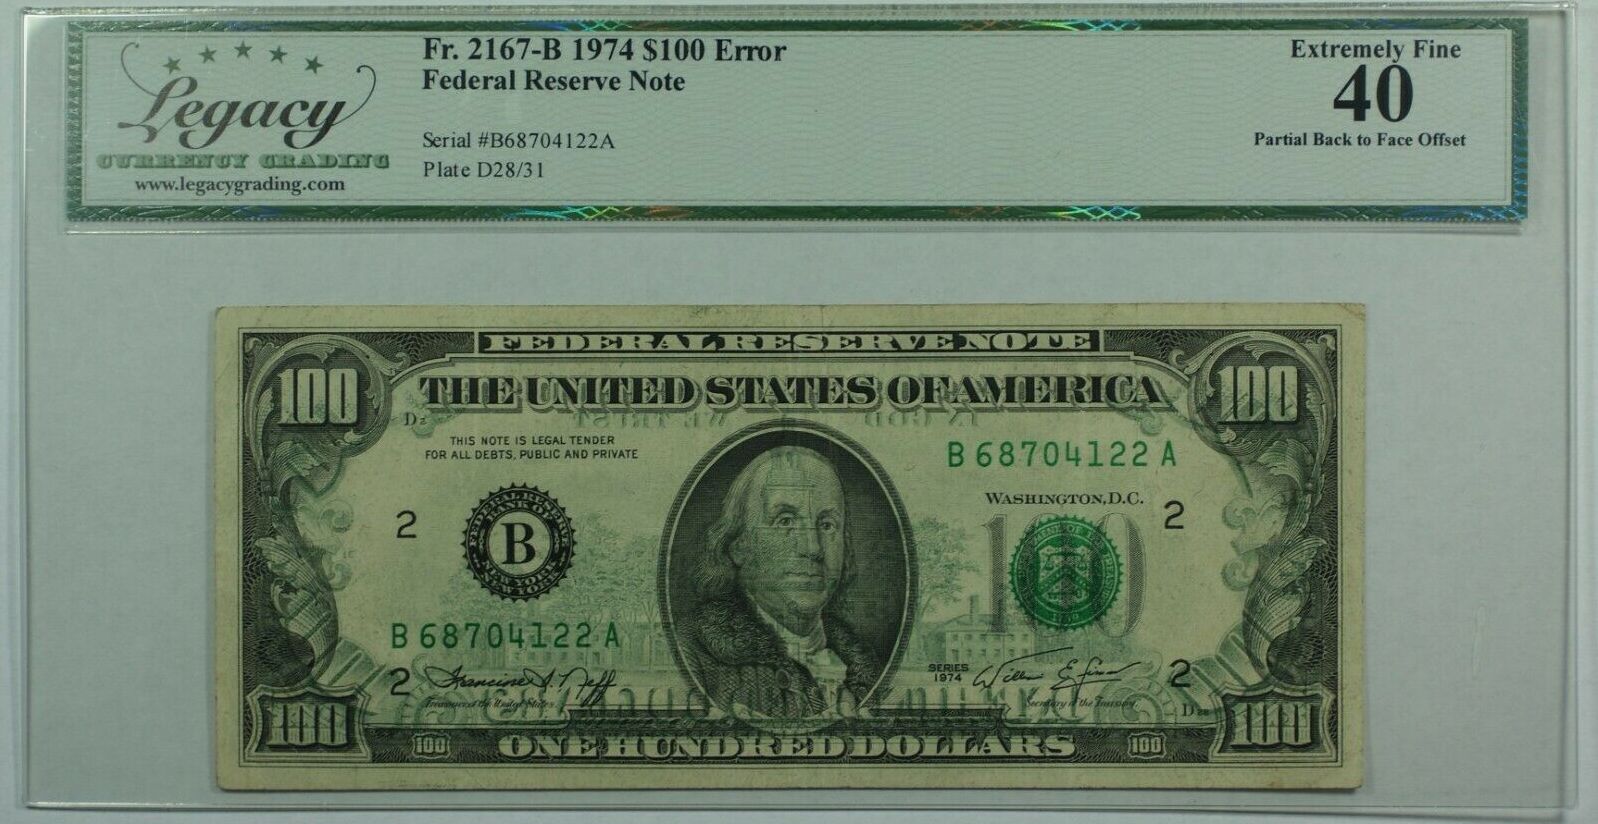 Banknoten 1974 $ 1974 Series $100 Dollar FRN Partial Offset Error Note  Legacy Extra Fine 40 Legacy Extremely Fine 40 | MA-Shops